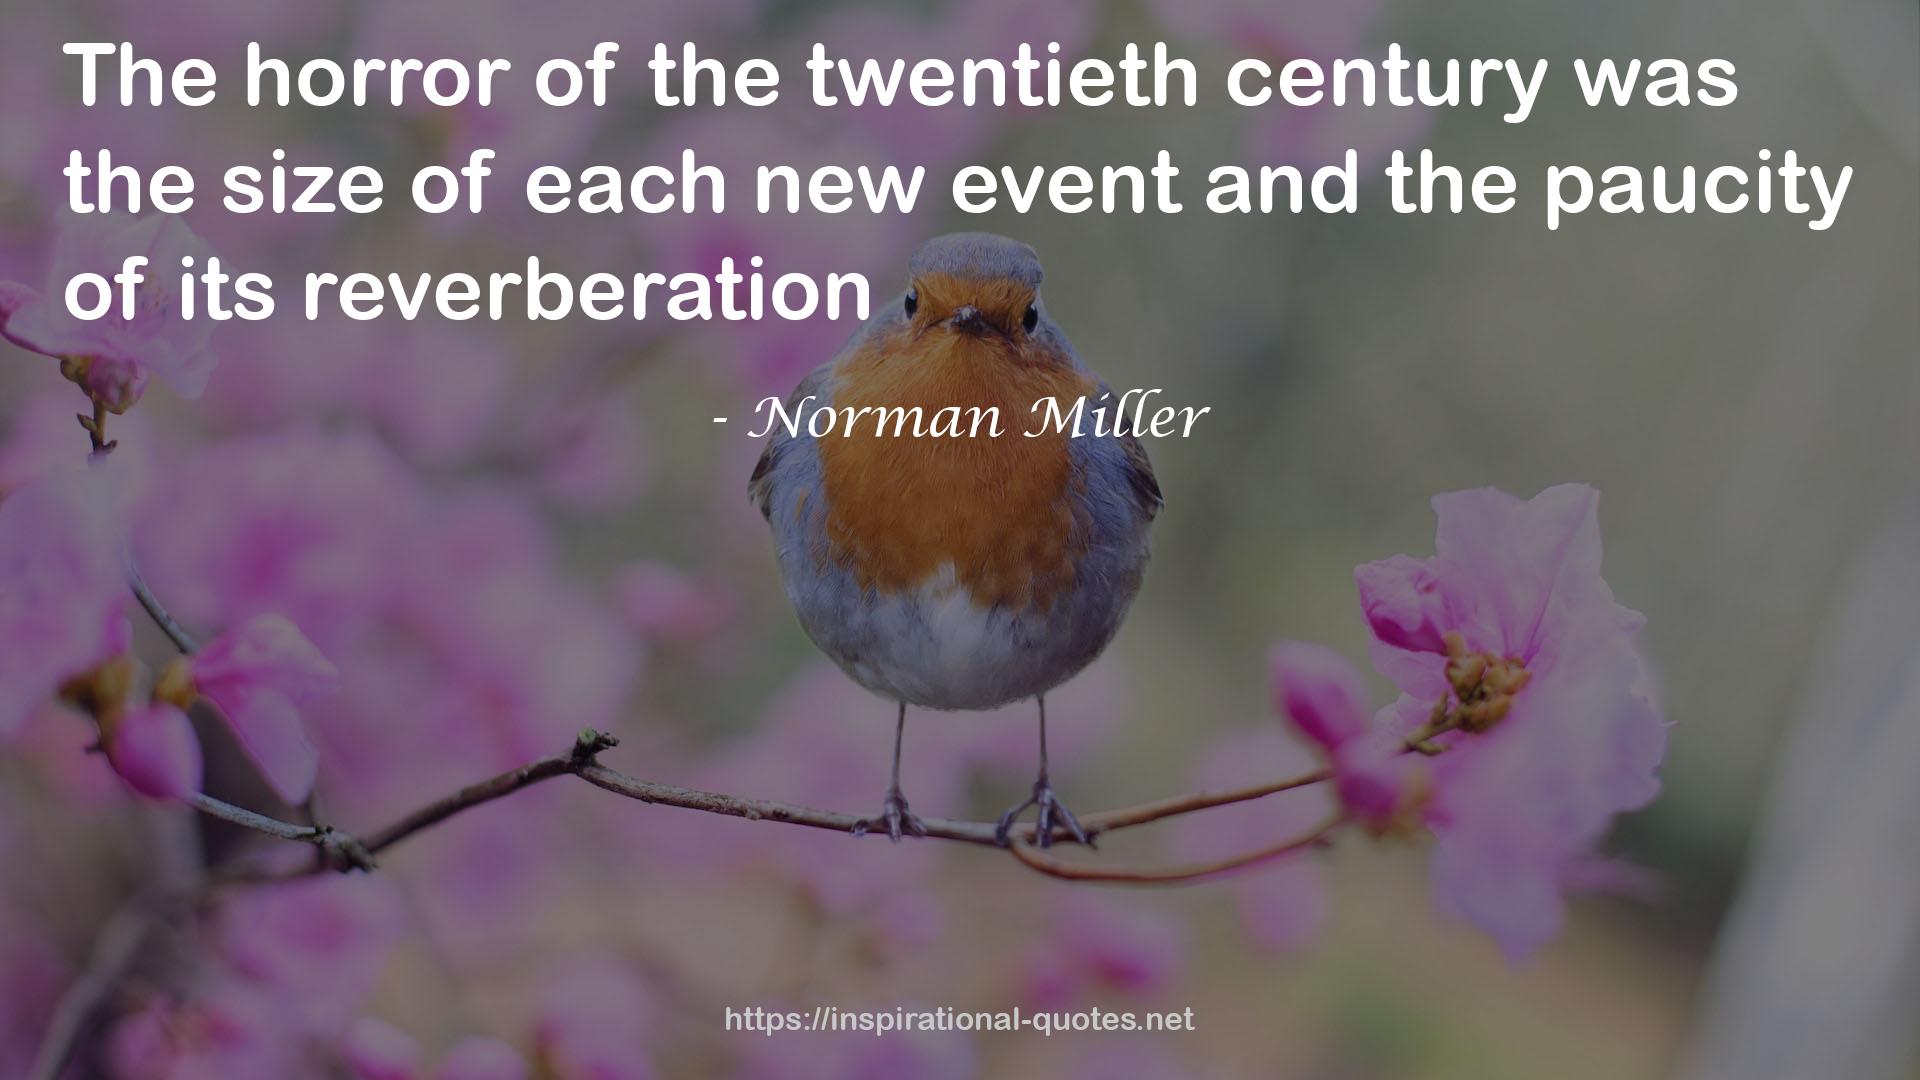 Norman Miller QUOTES